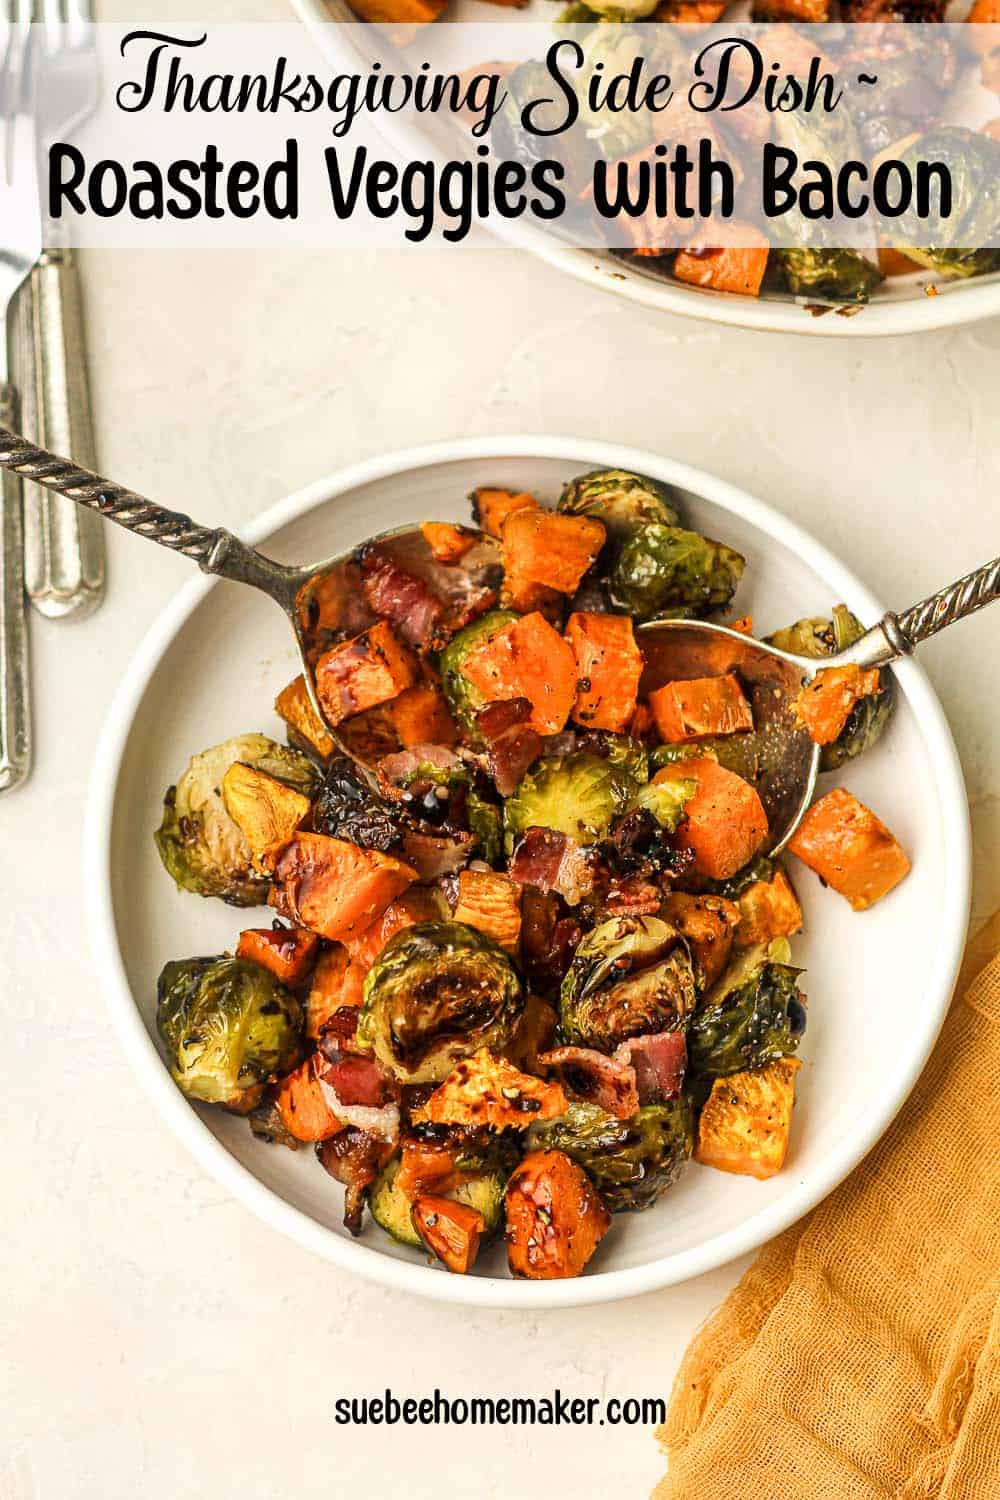 A serving plate of roasted veggies with bacon.